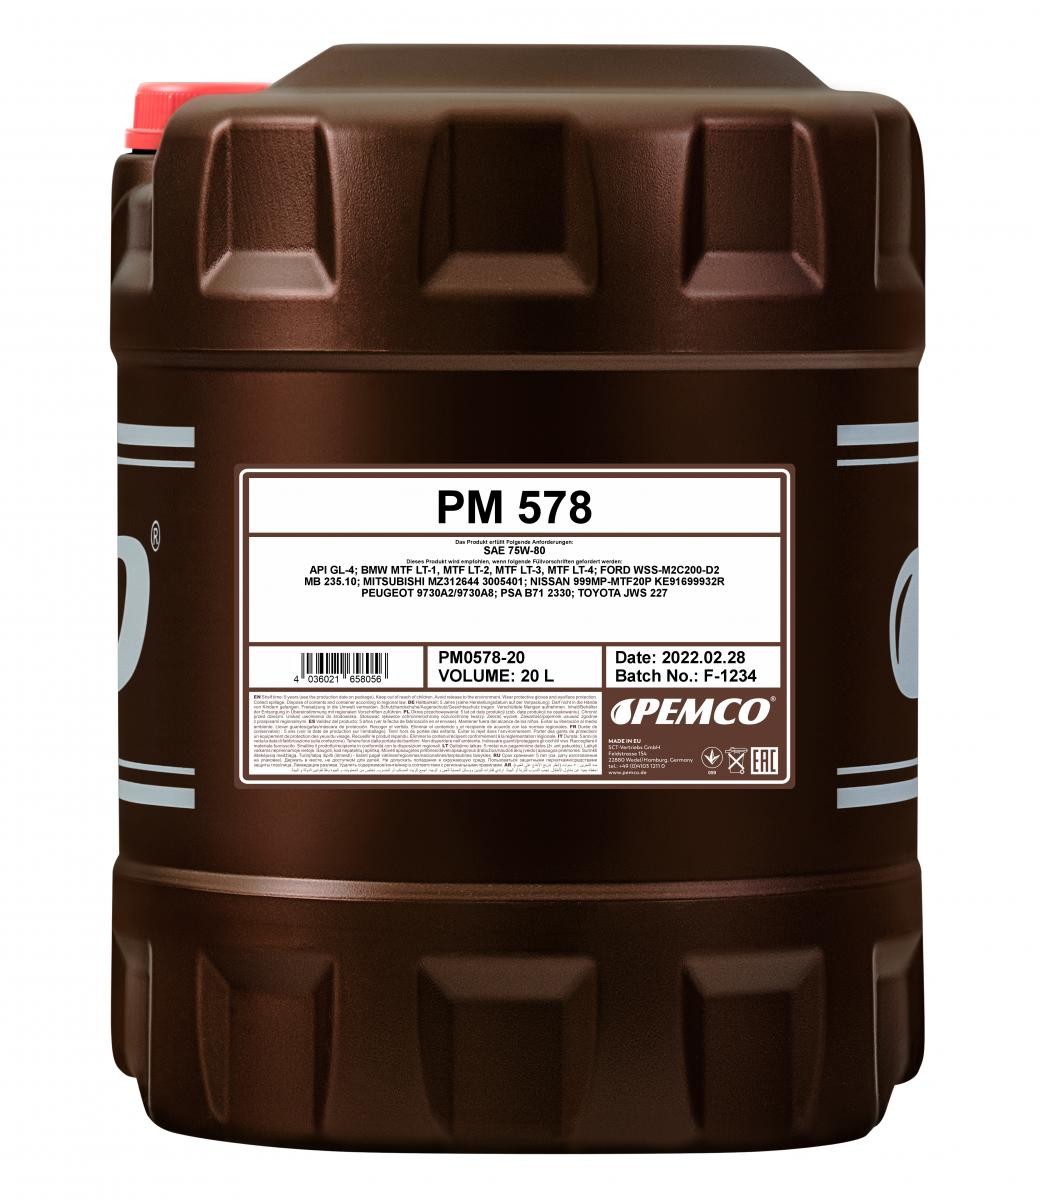 PEMCO iPOID 578 PM0578-20 Manual Transmission Oil Capacity: 20l, 75W-80